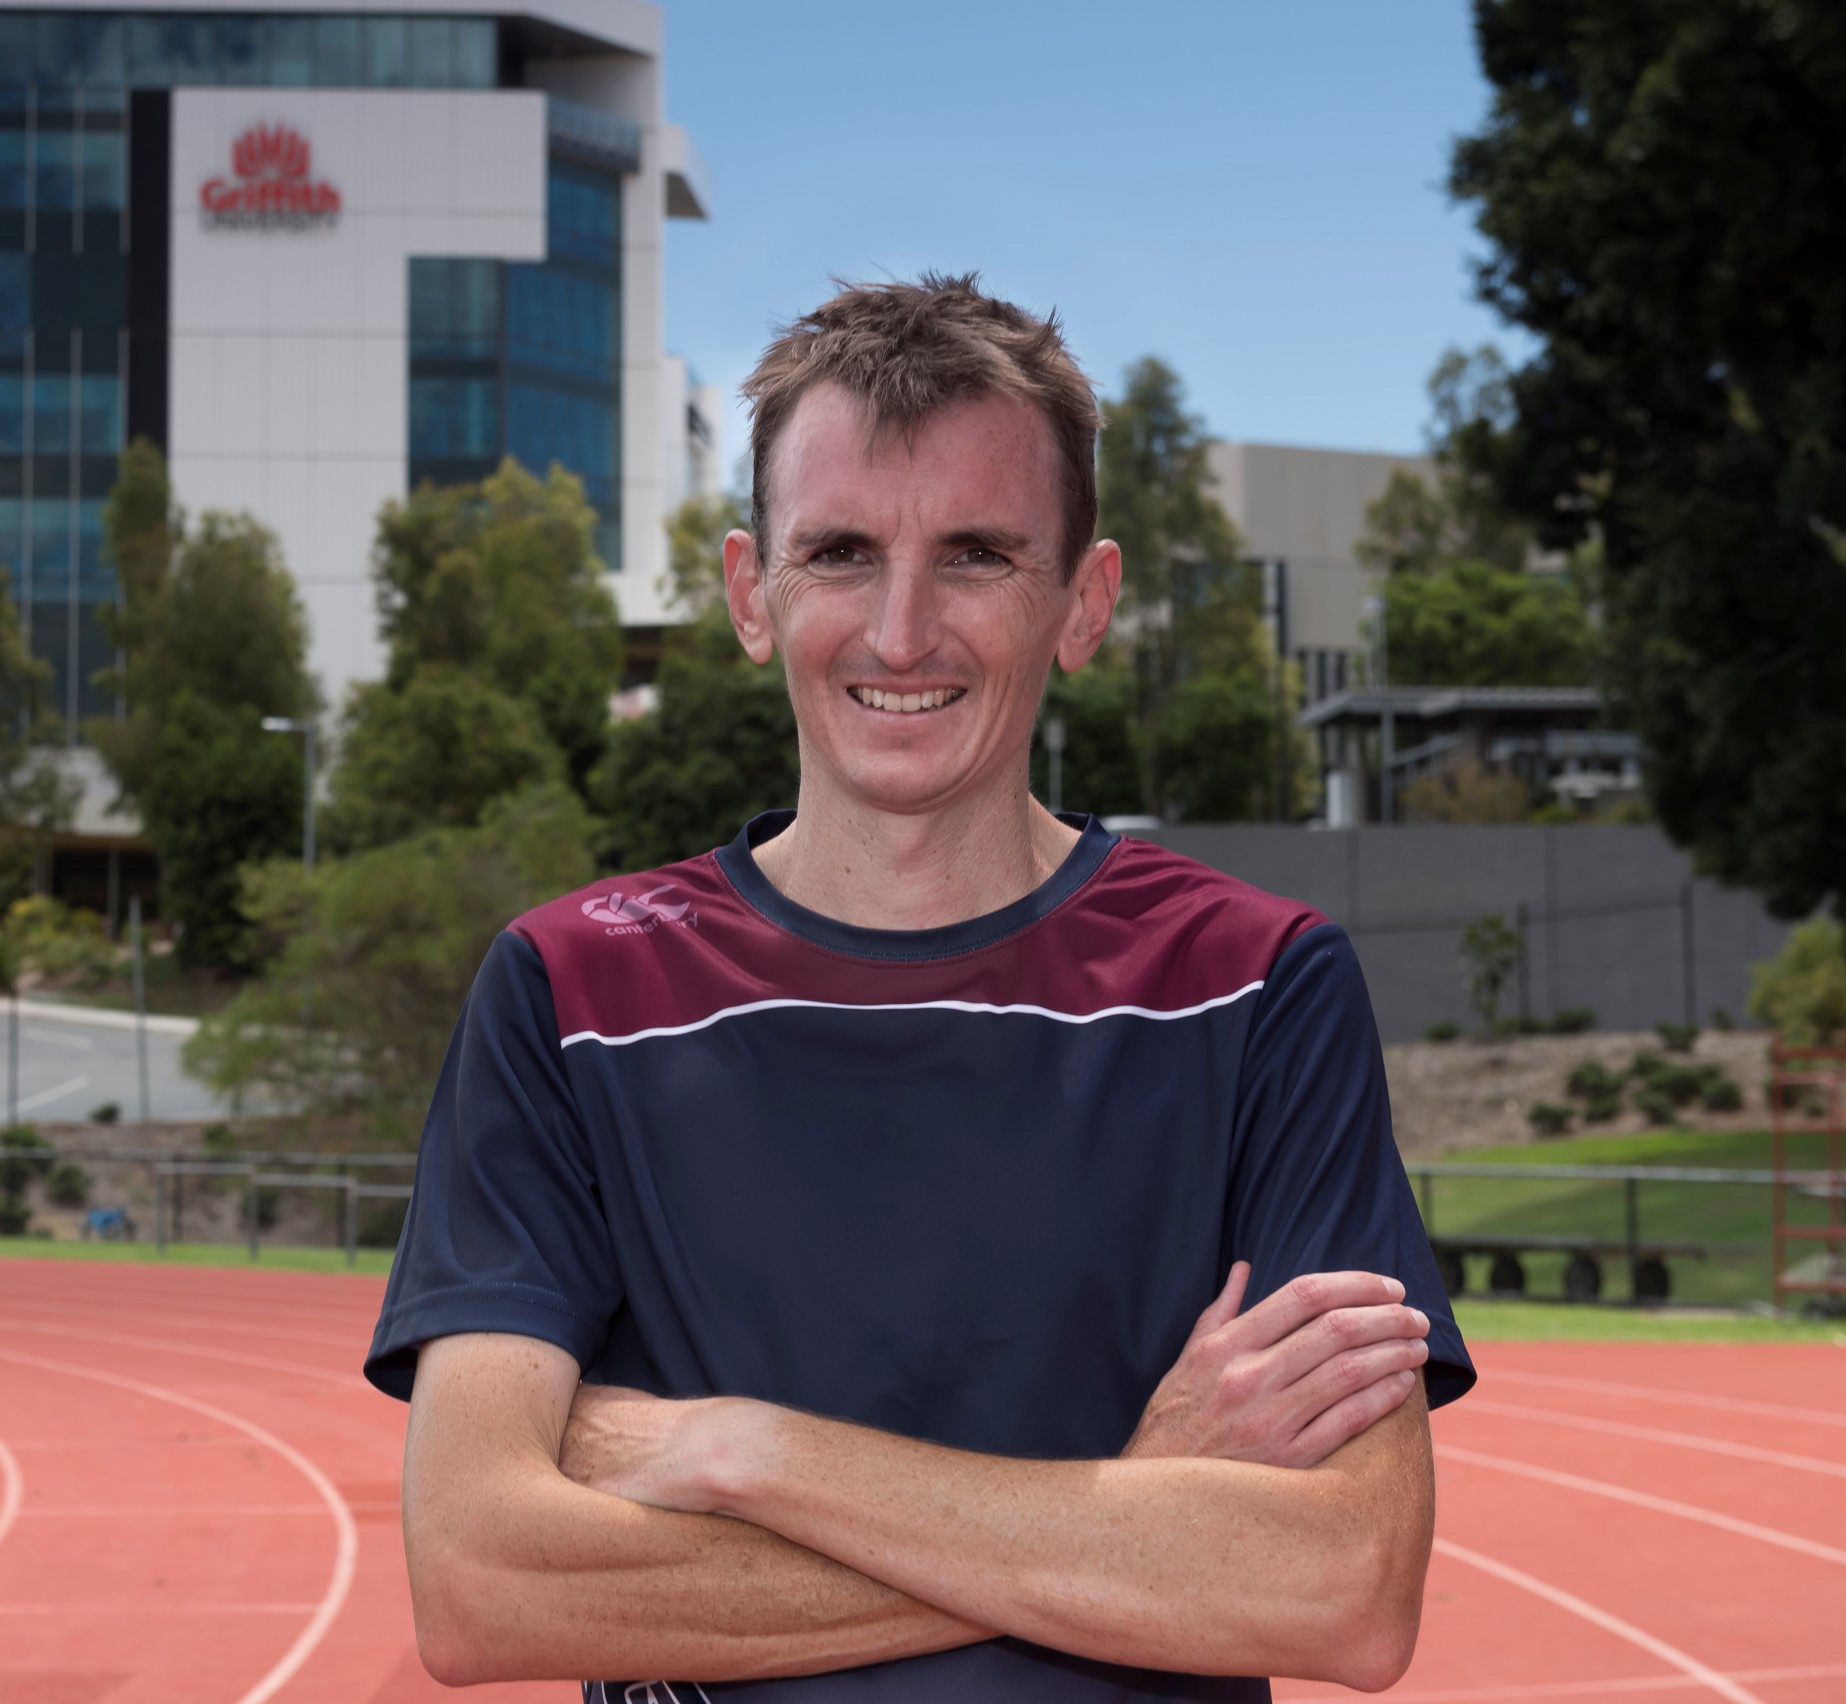 Bachelor of Business graduate, Michael Shelley, has repeated his Marathon success at GC2018.